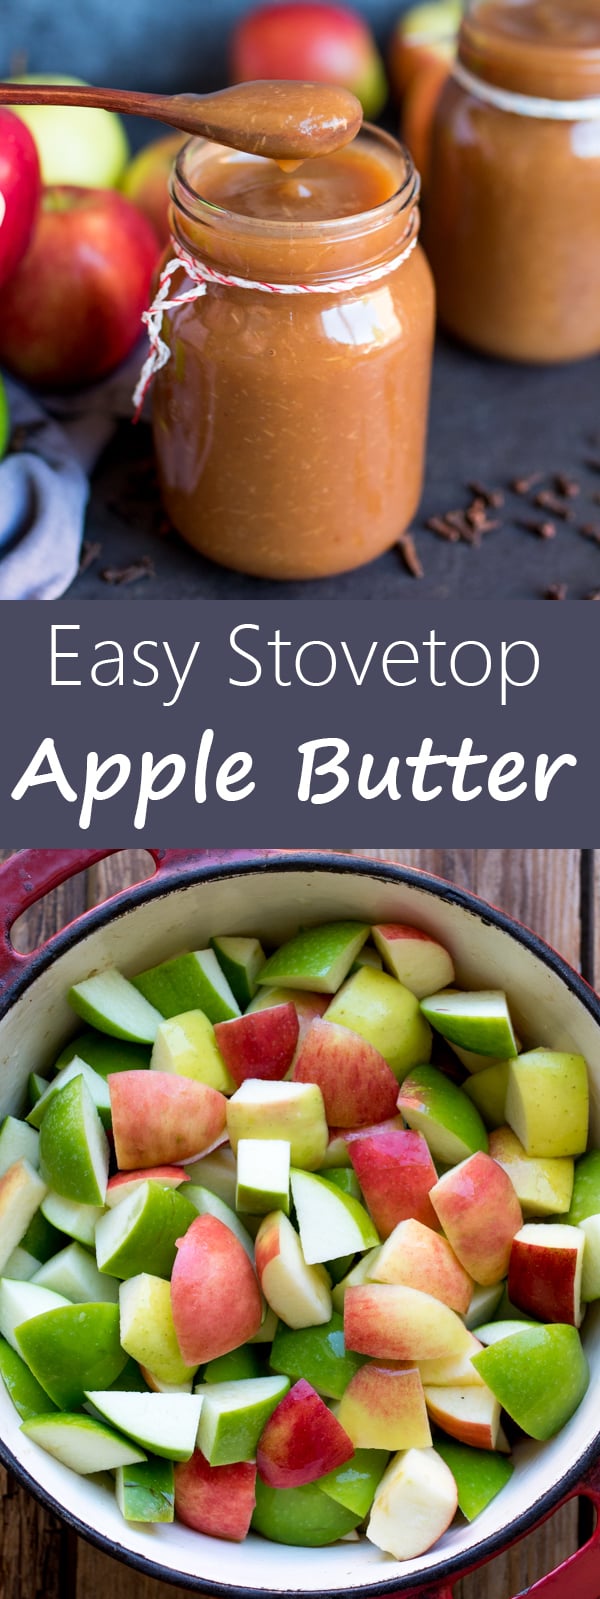 easy stovetop apple butter pin